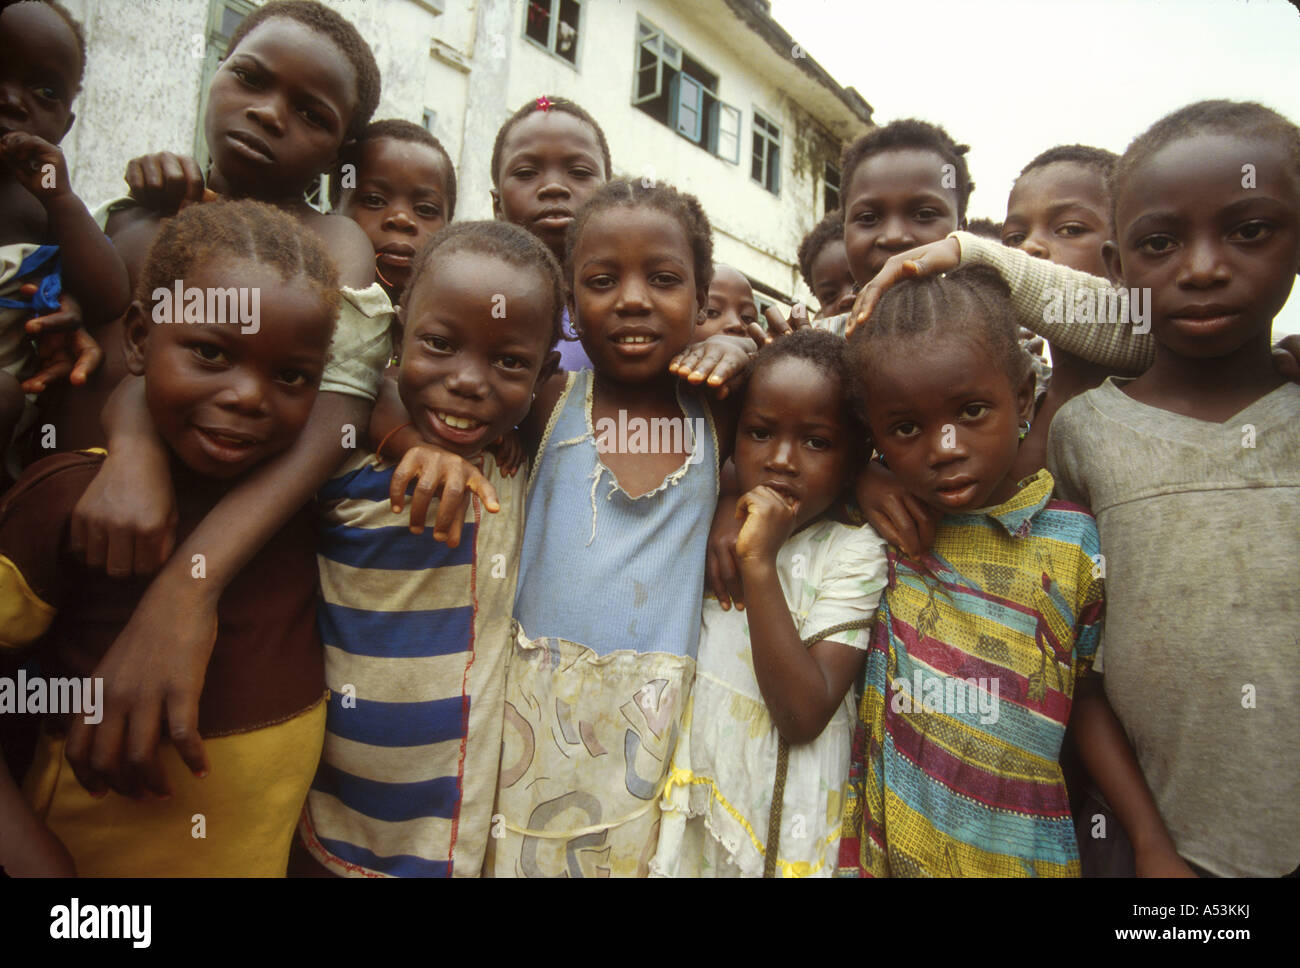 Painet ha1553 3123 liberia children goba country developing nation less economically developed culture emerging market Stock Photo